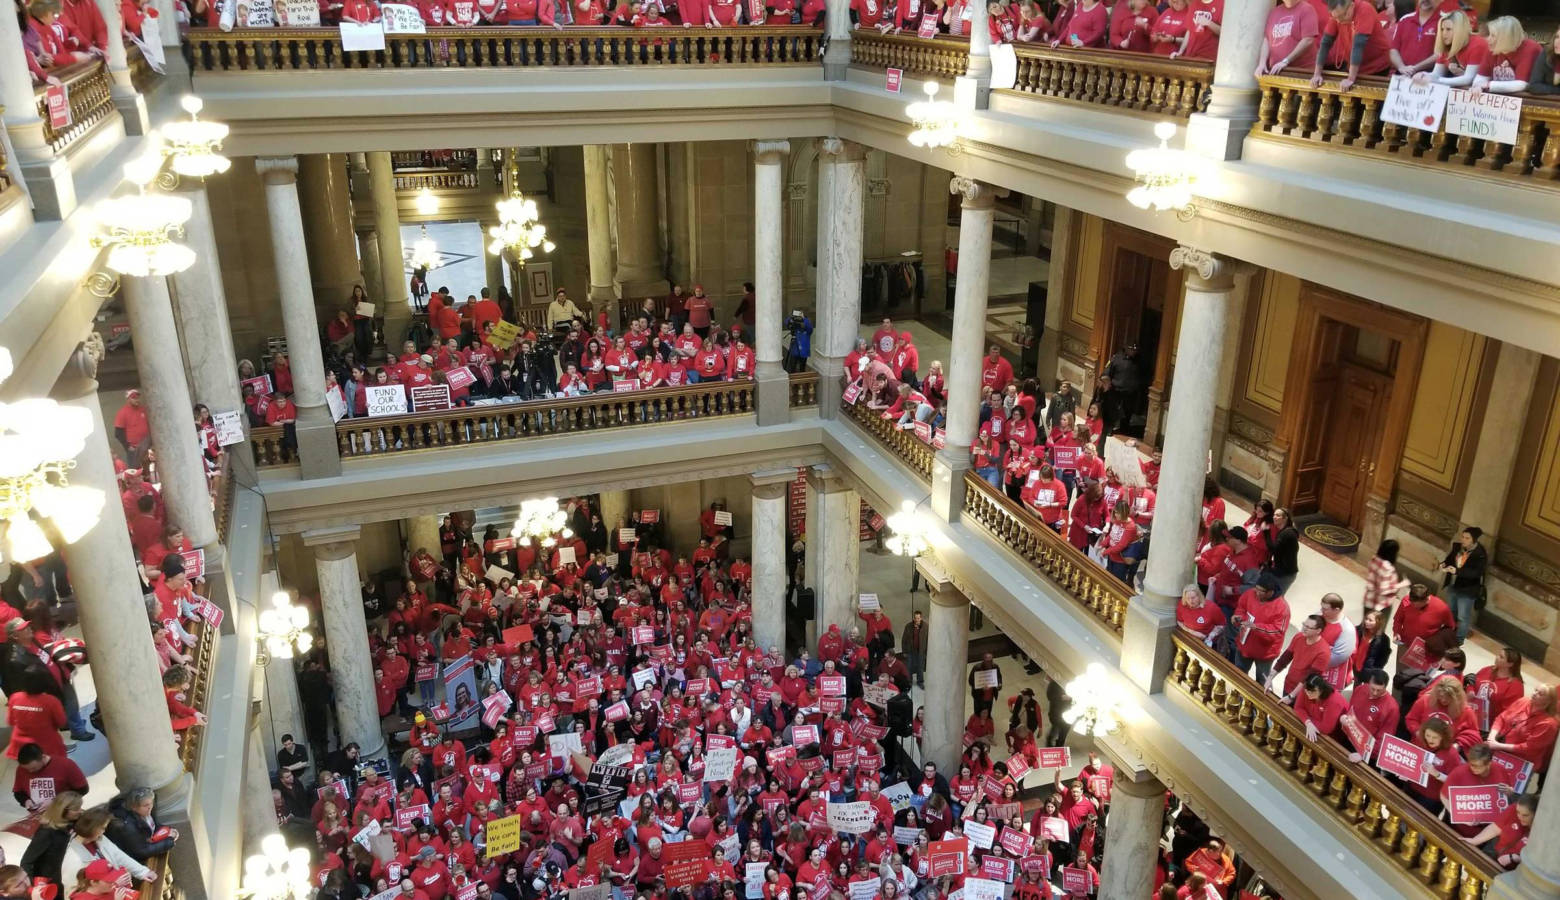 Teachers rally at the statehouse in March 2019. (Jeanie Lindsay/IPB News)